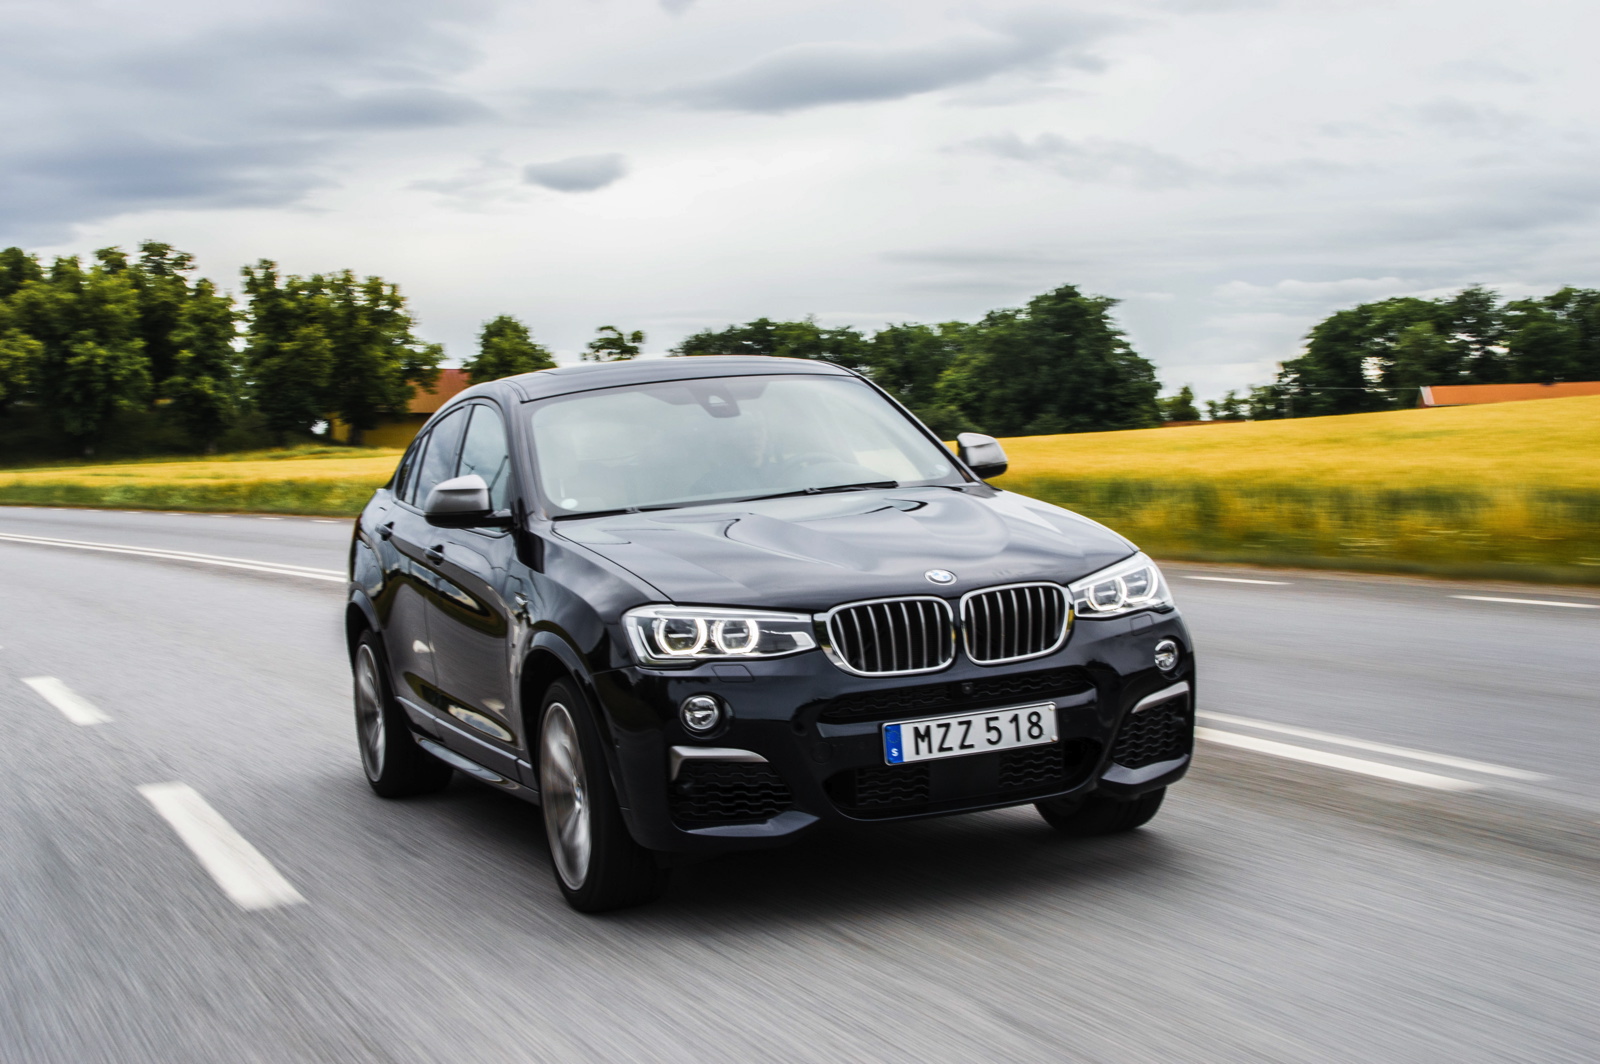 BMW X4 is contender in Motor Trend's SUV of the Year